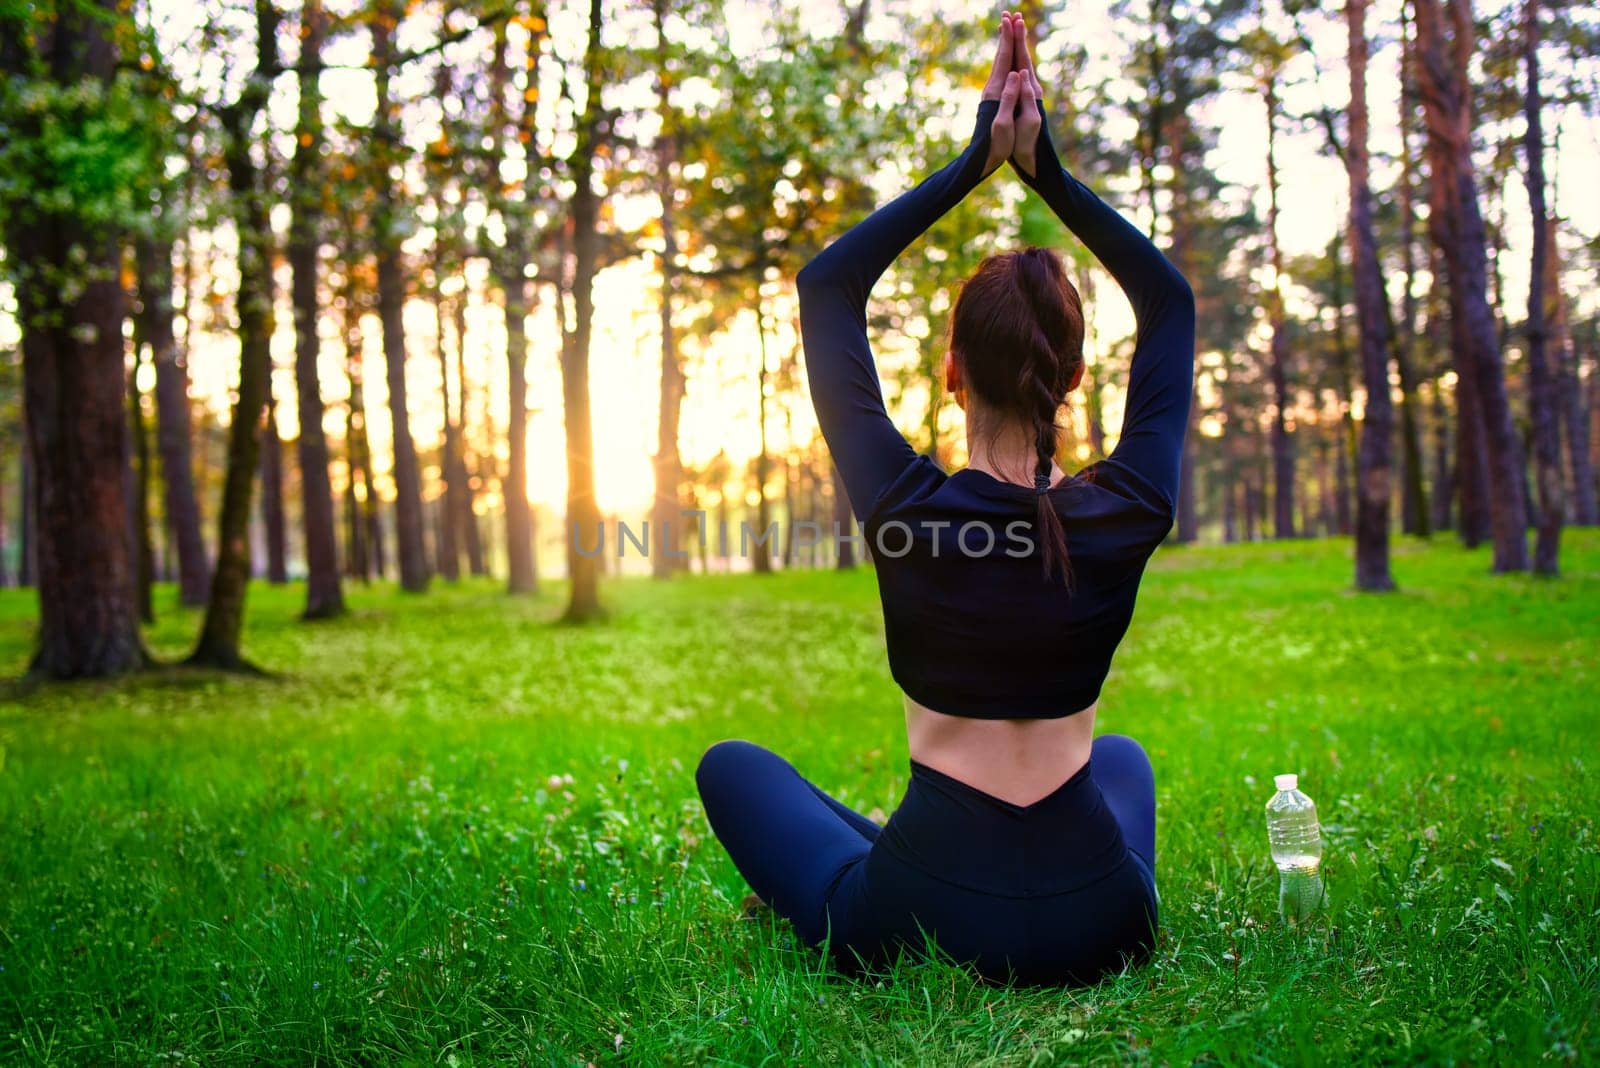 Slim beautiful woman in black tight fitting tracksuit sitting on grass in forest in yoga pose.